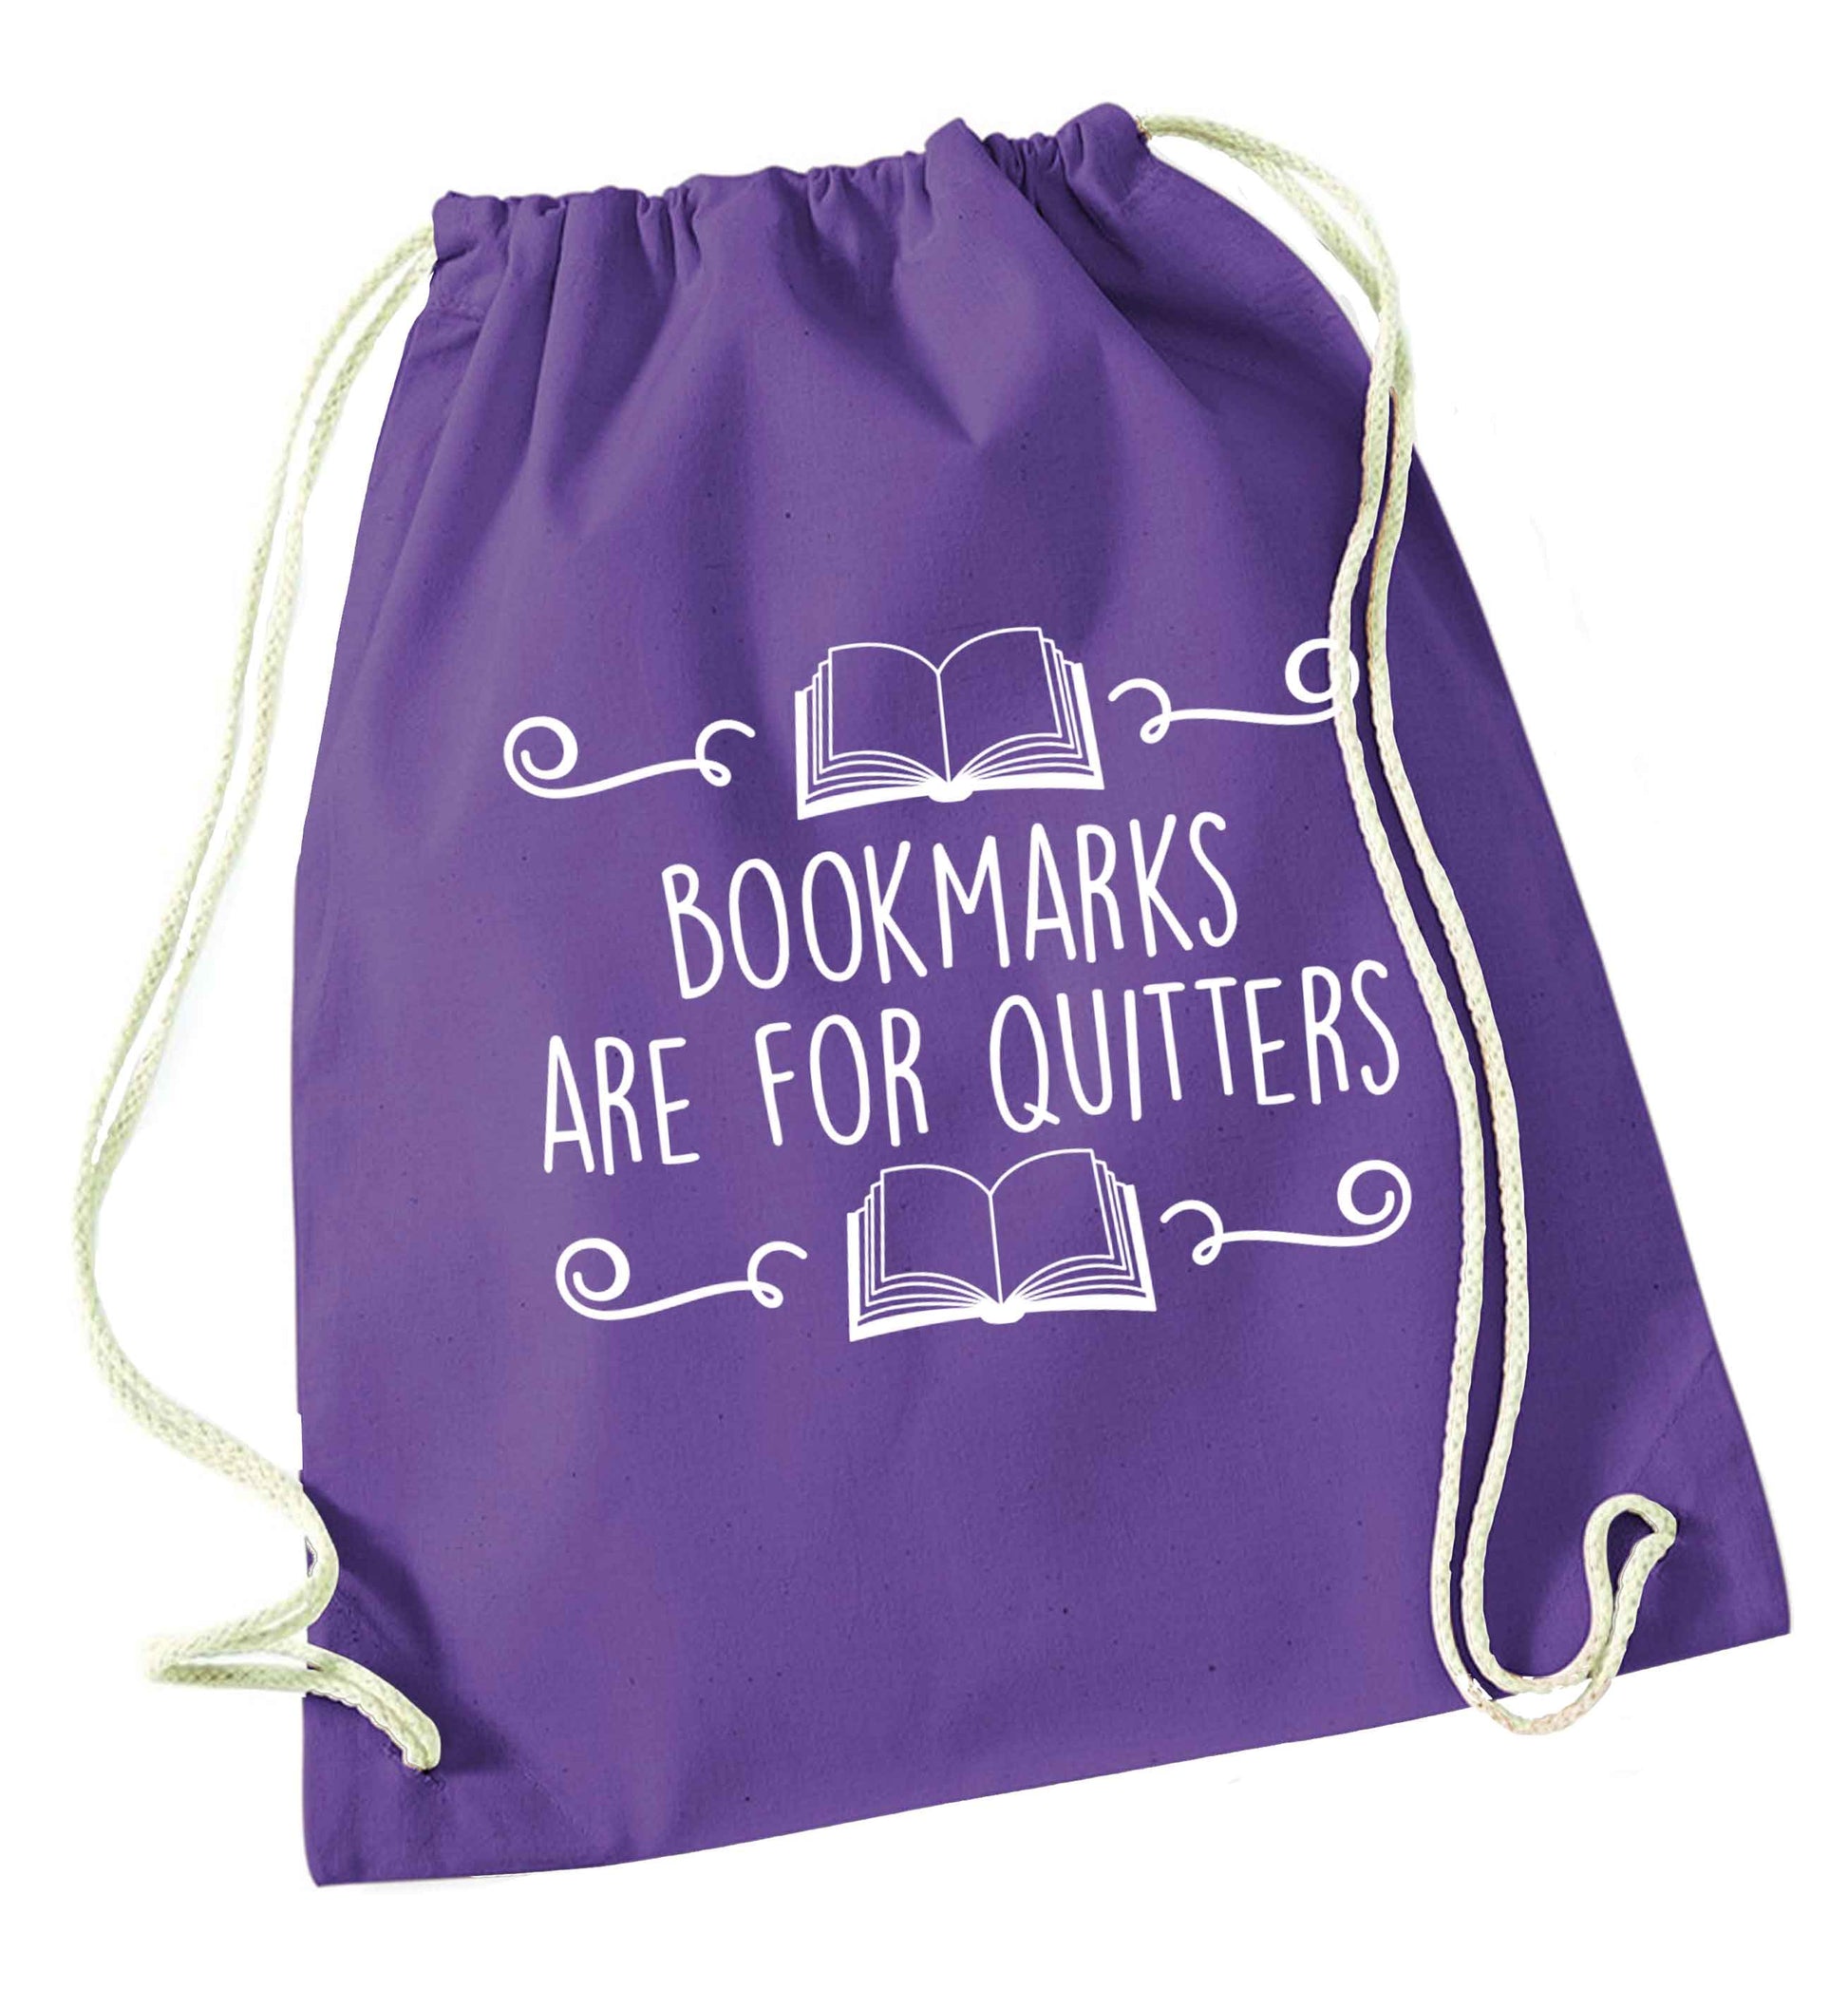 Bookmarks are for quitters purple drawstring bag